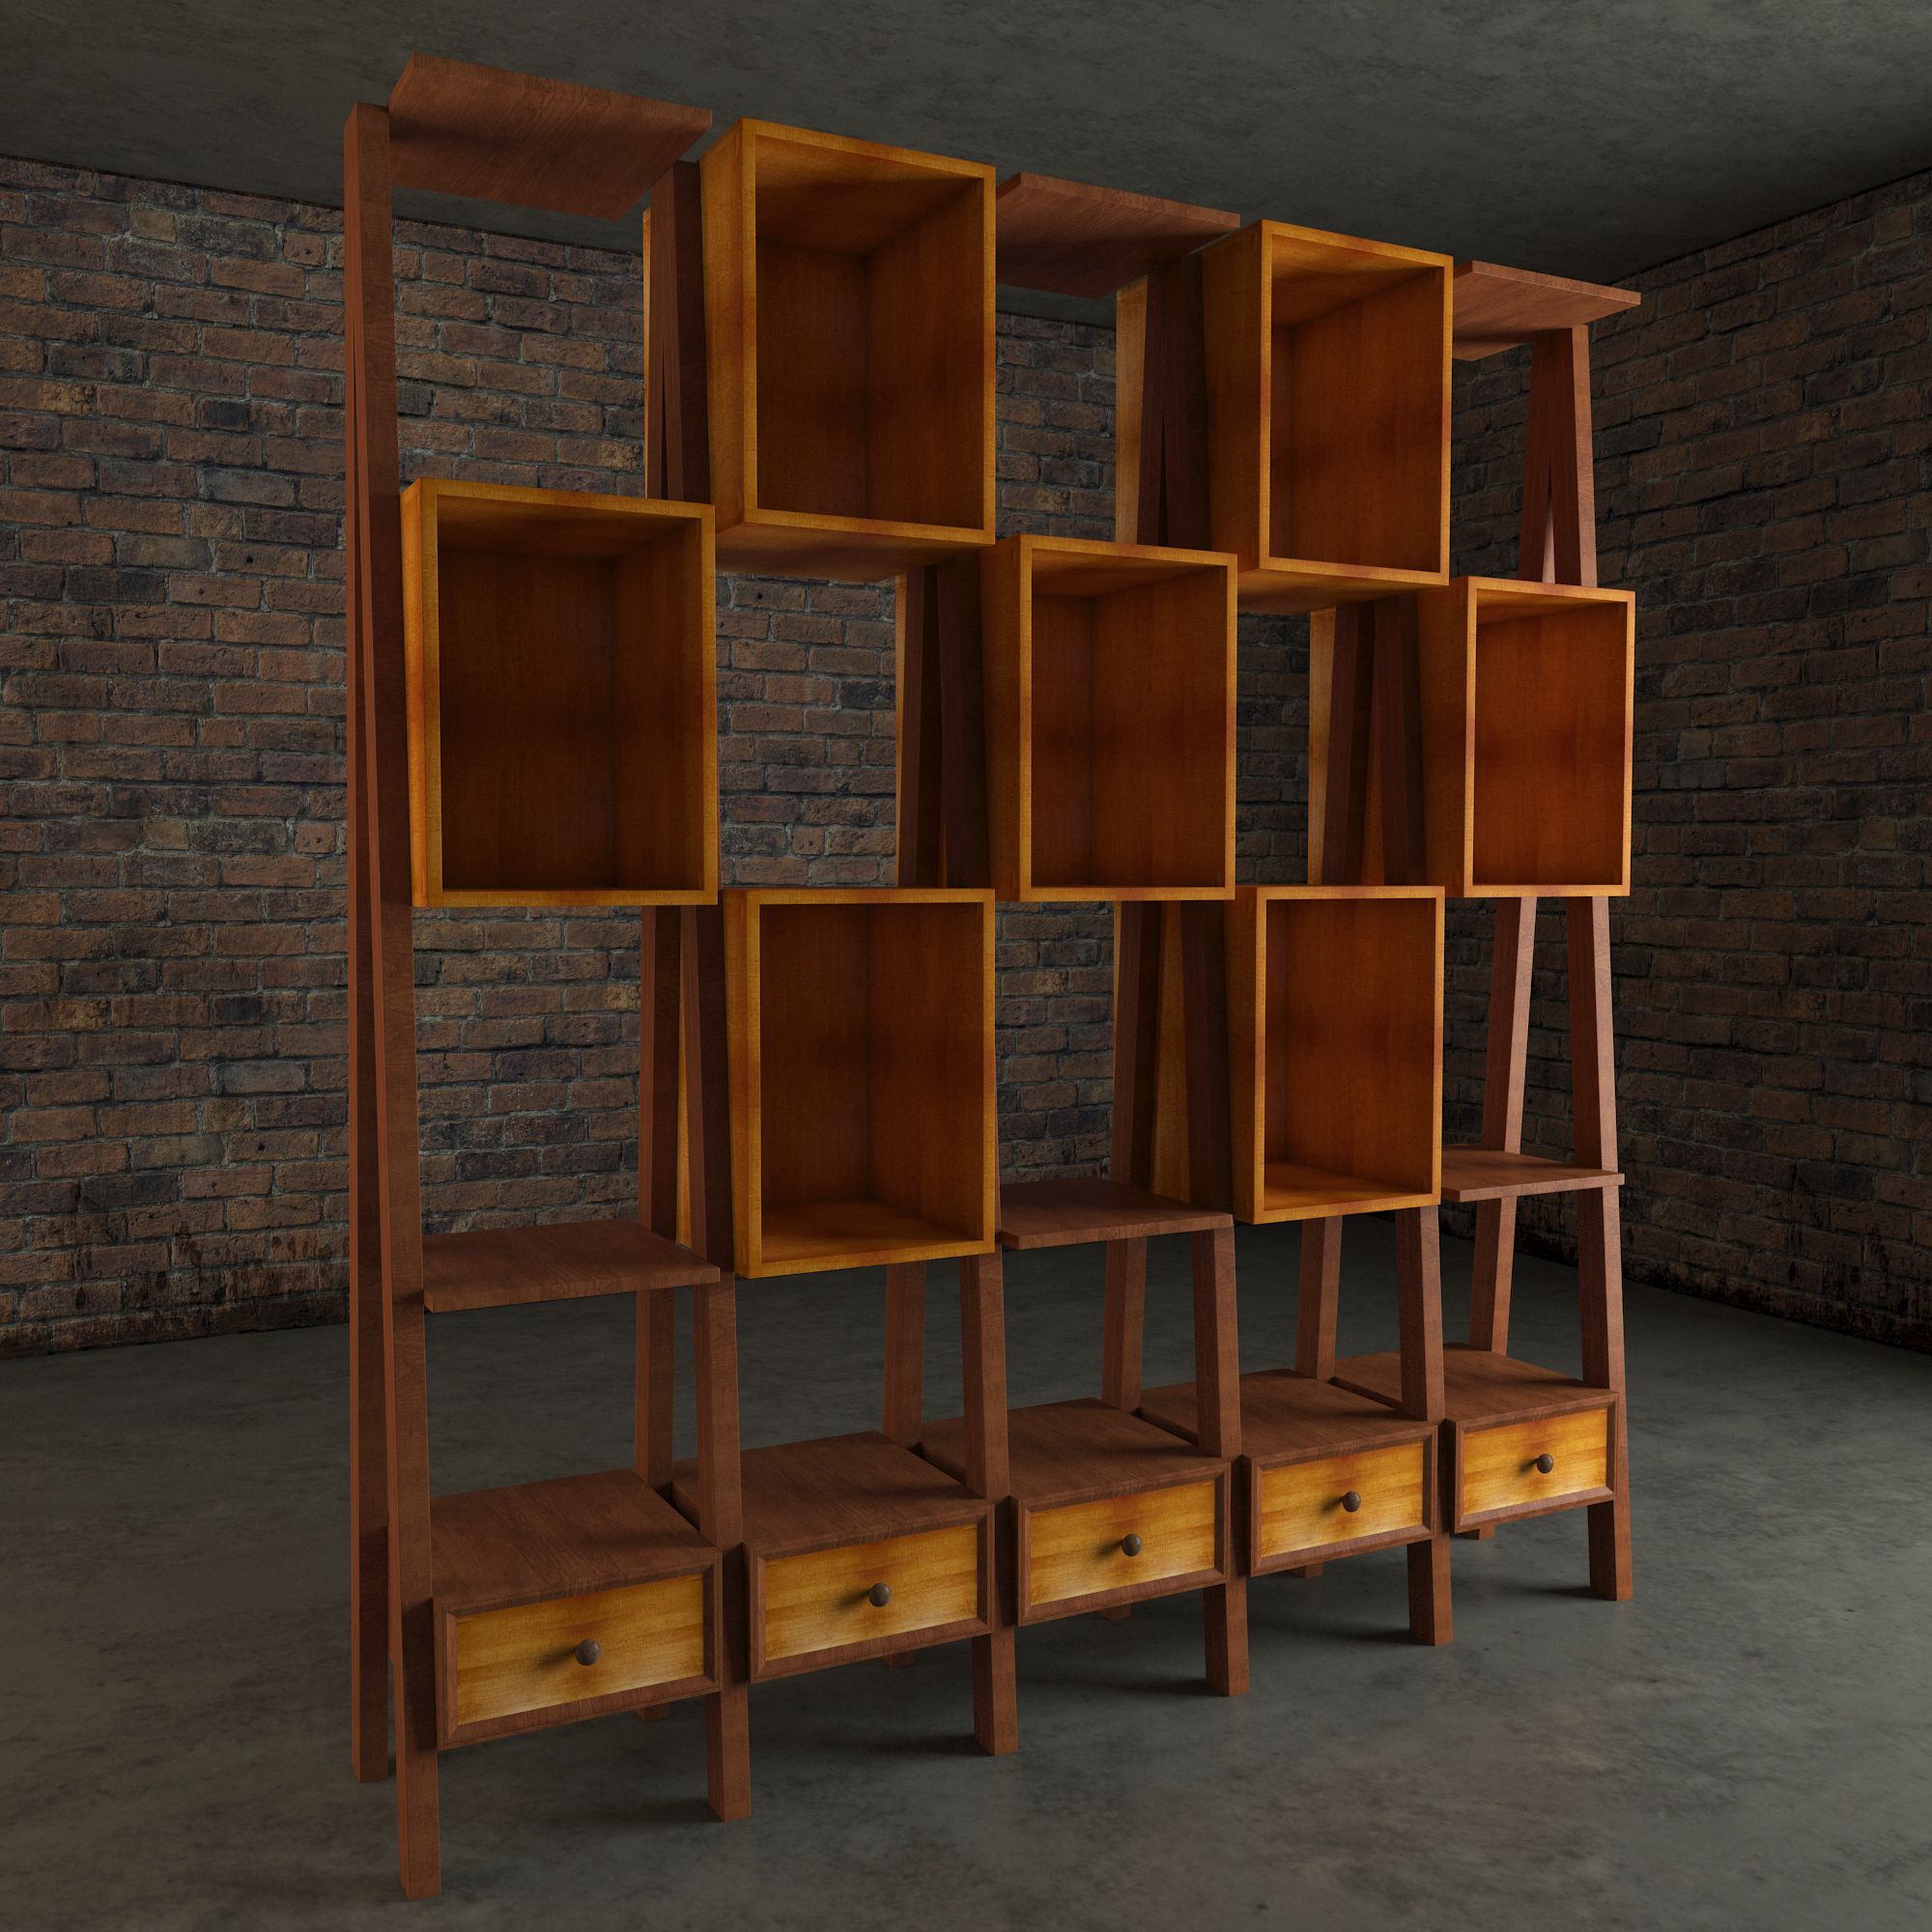 Buy A Handmade The Prime Bookshelf Made To Order From